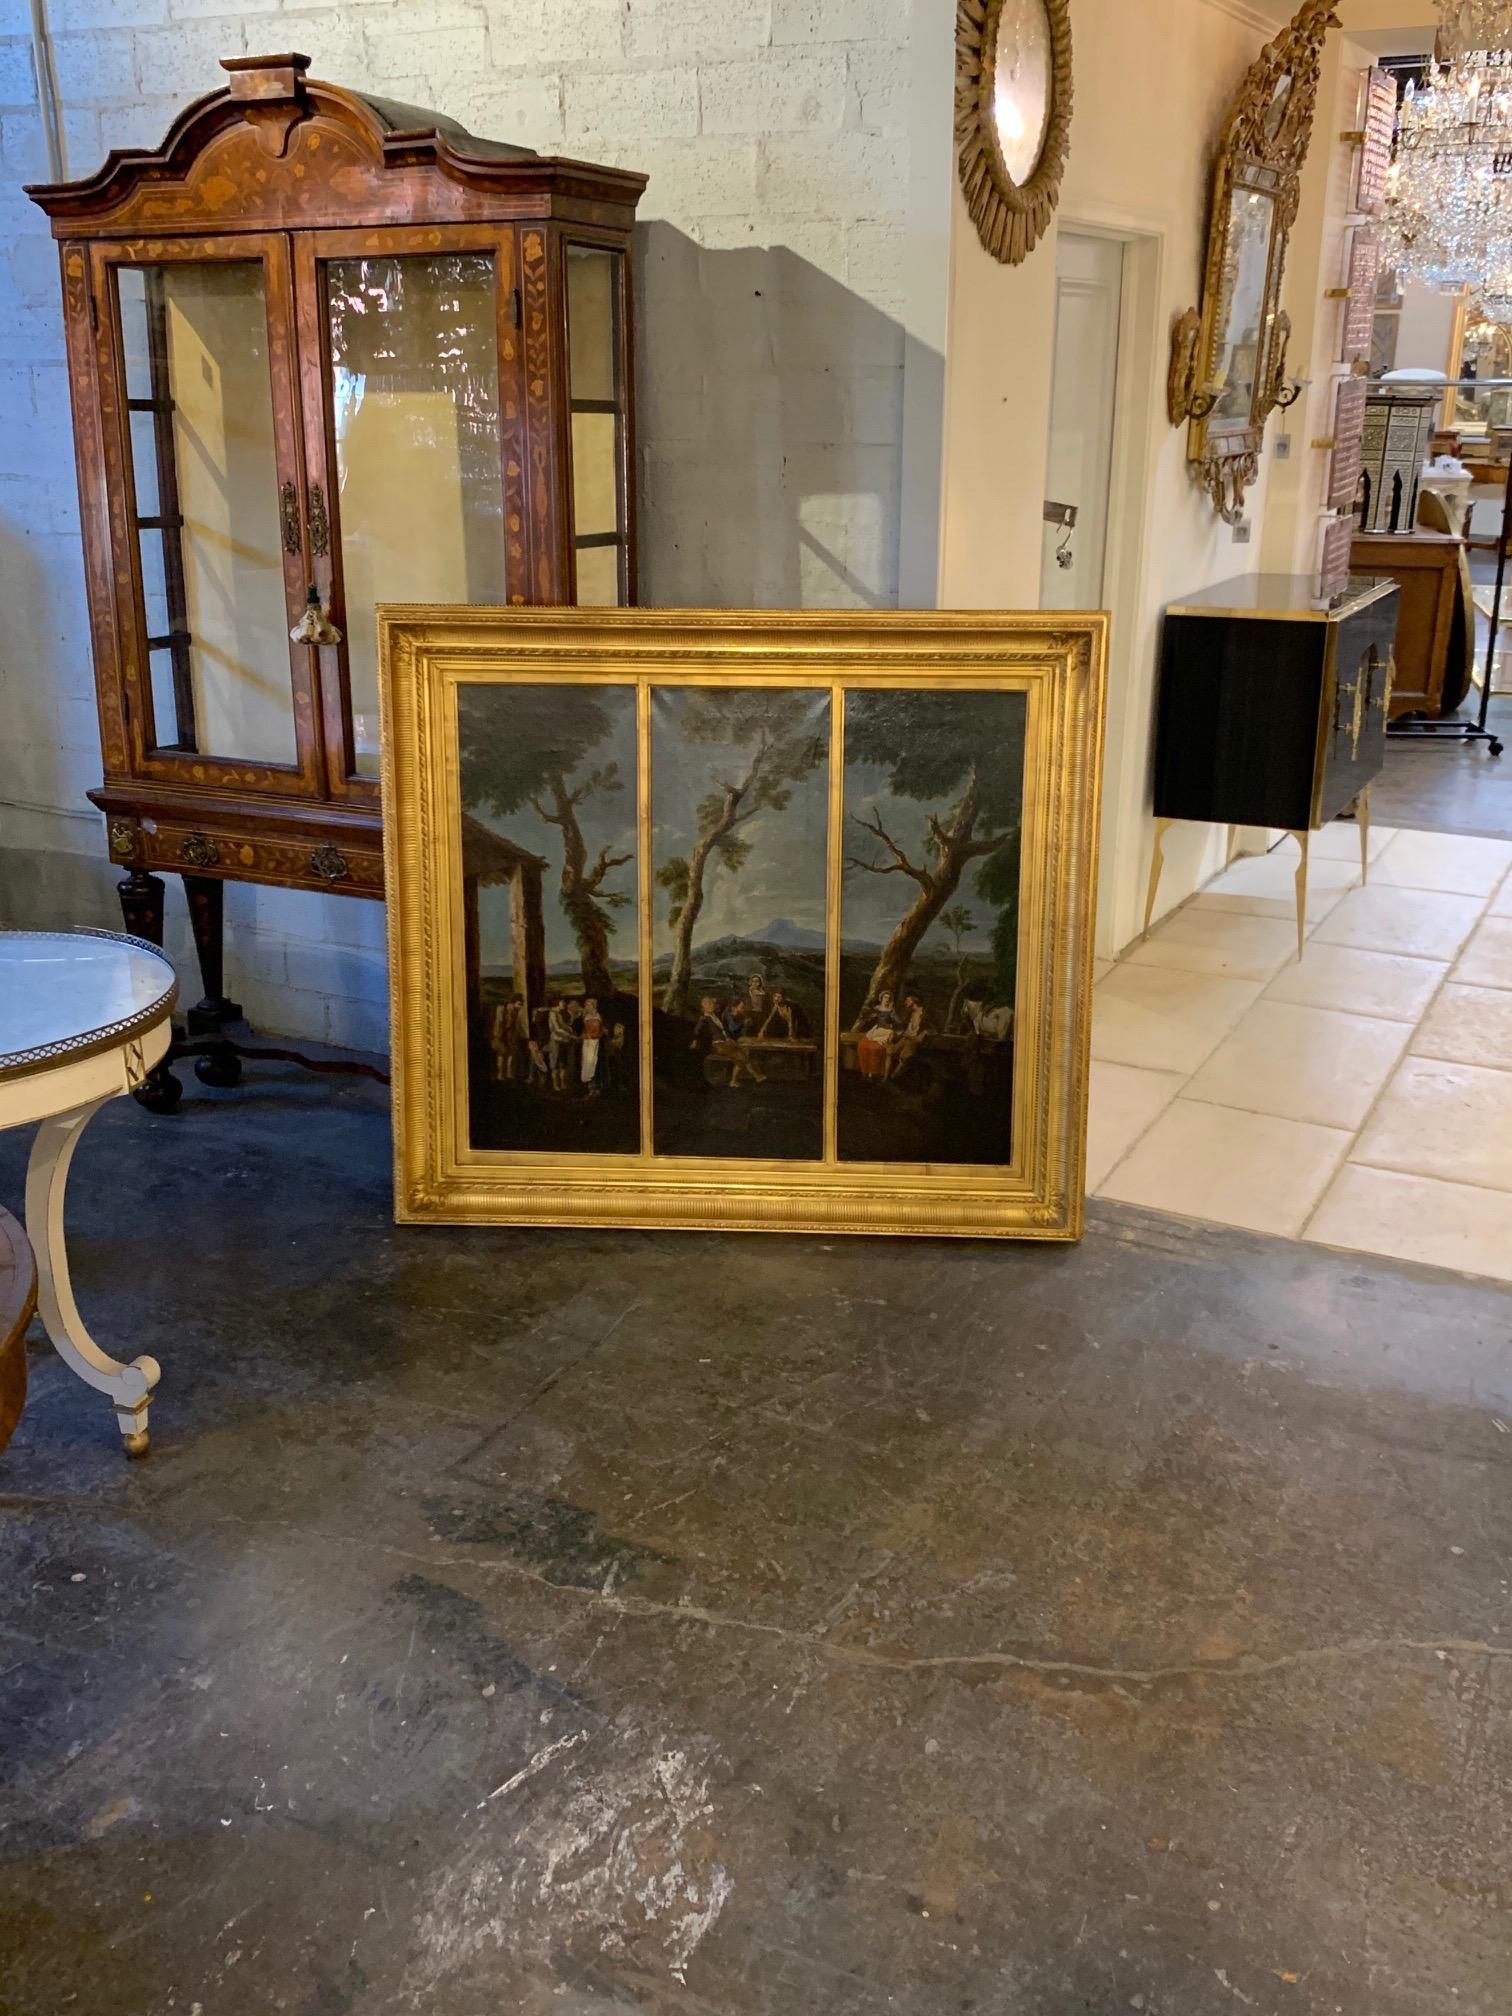 Beautiful 19th century original oil painting on canvas featuring rural scenes. Interesting giltwood frame that has 3 sections with each section having a different painted scene. Lovely!